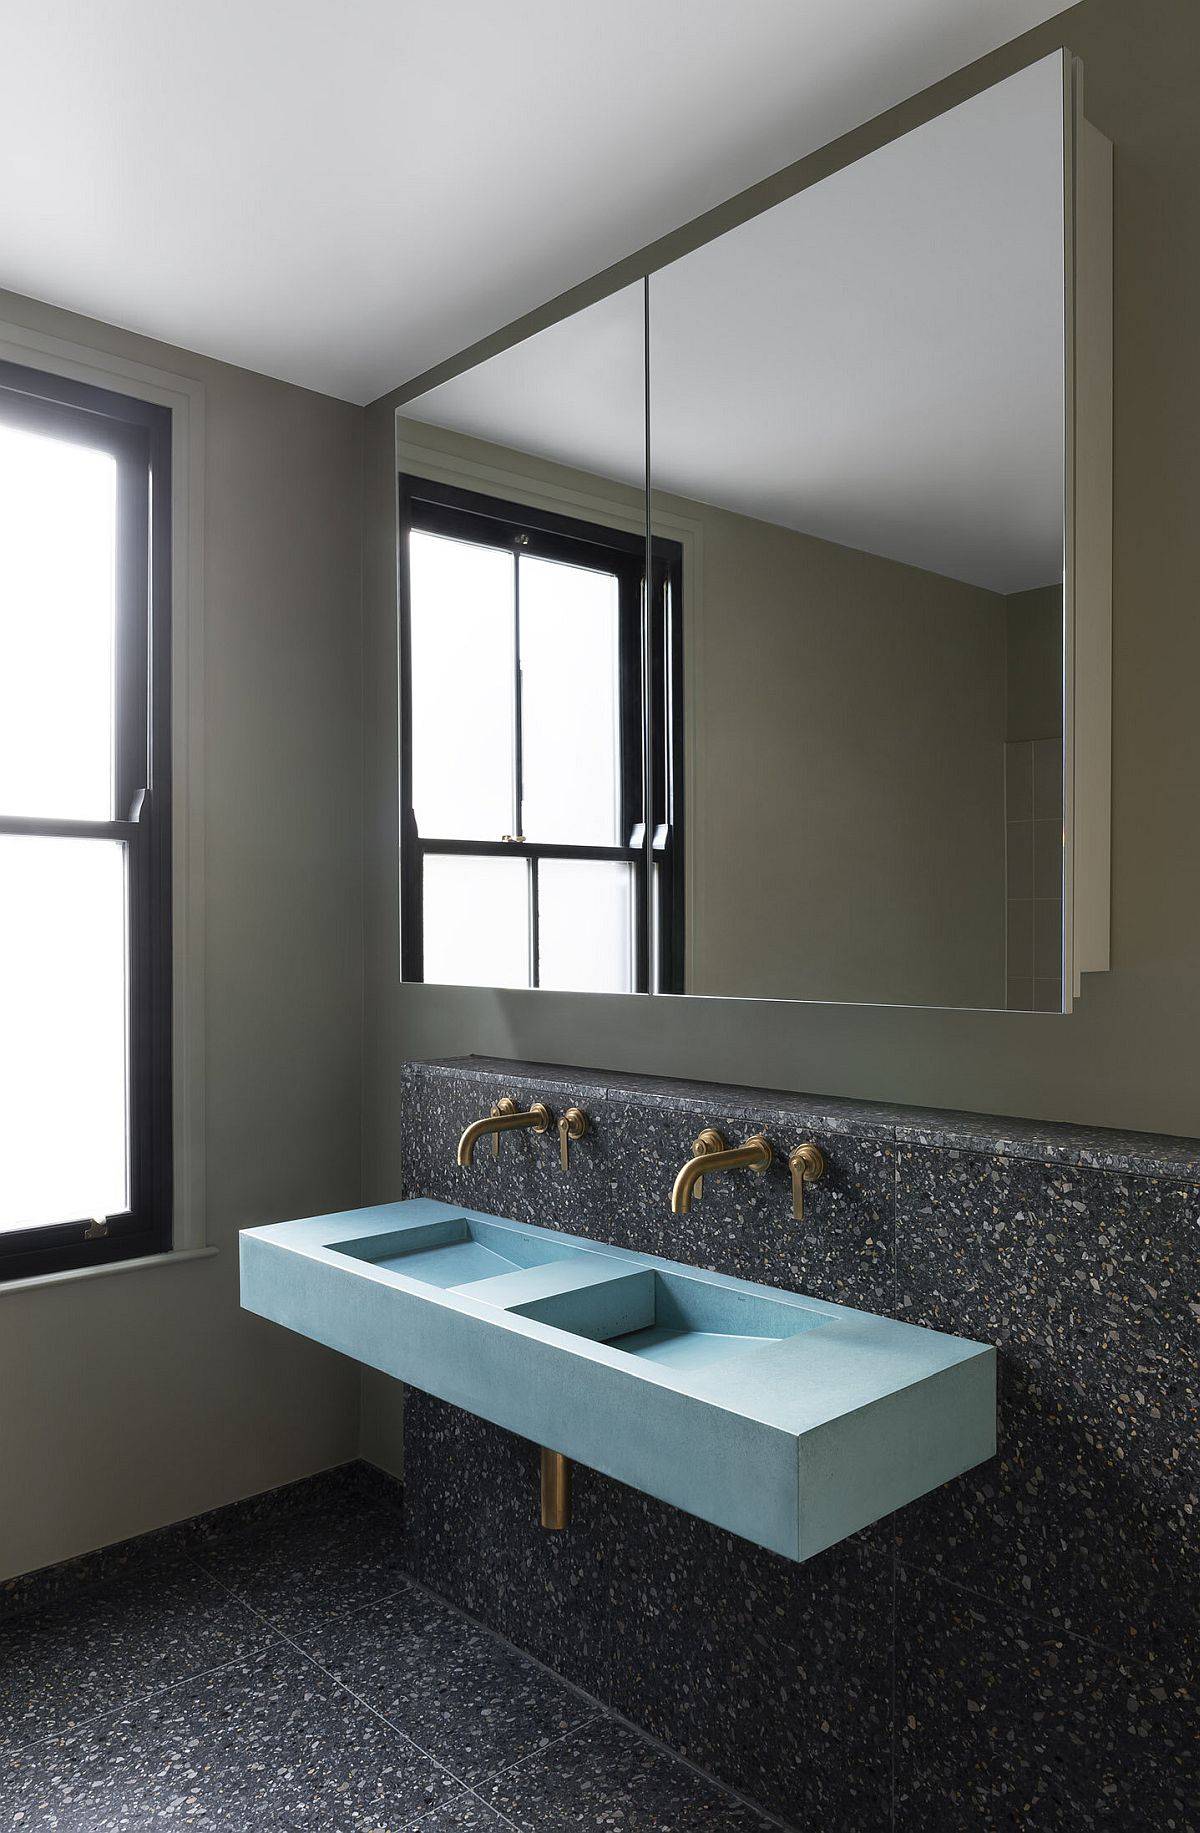 Terrazzo-floor-and-tiles-in-the-bathroom-continue-the-theme-of-the-home-renovation-59293